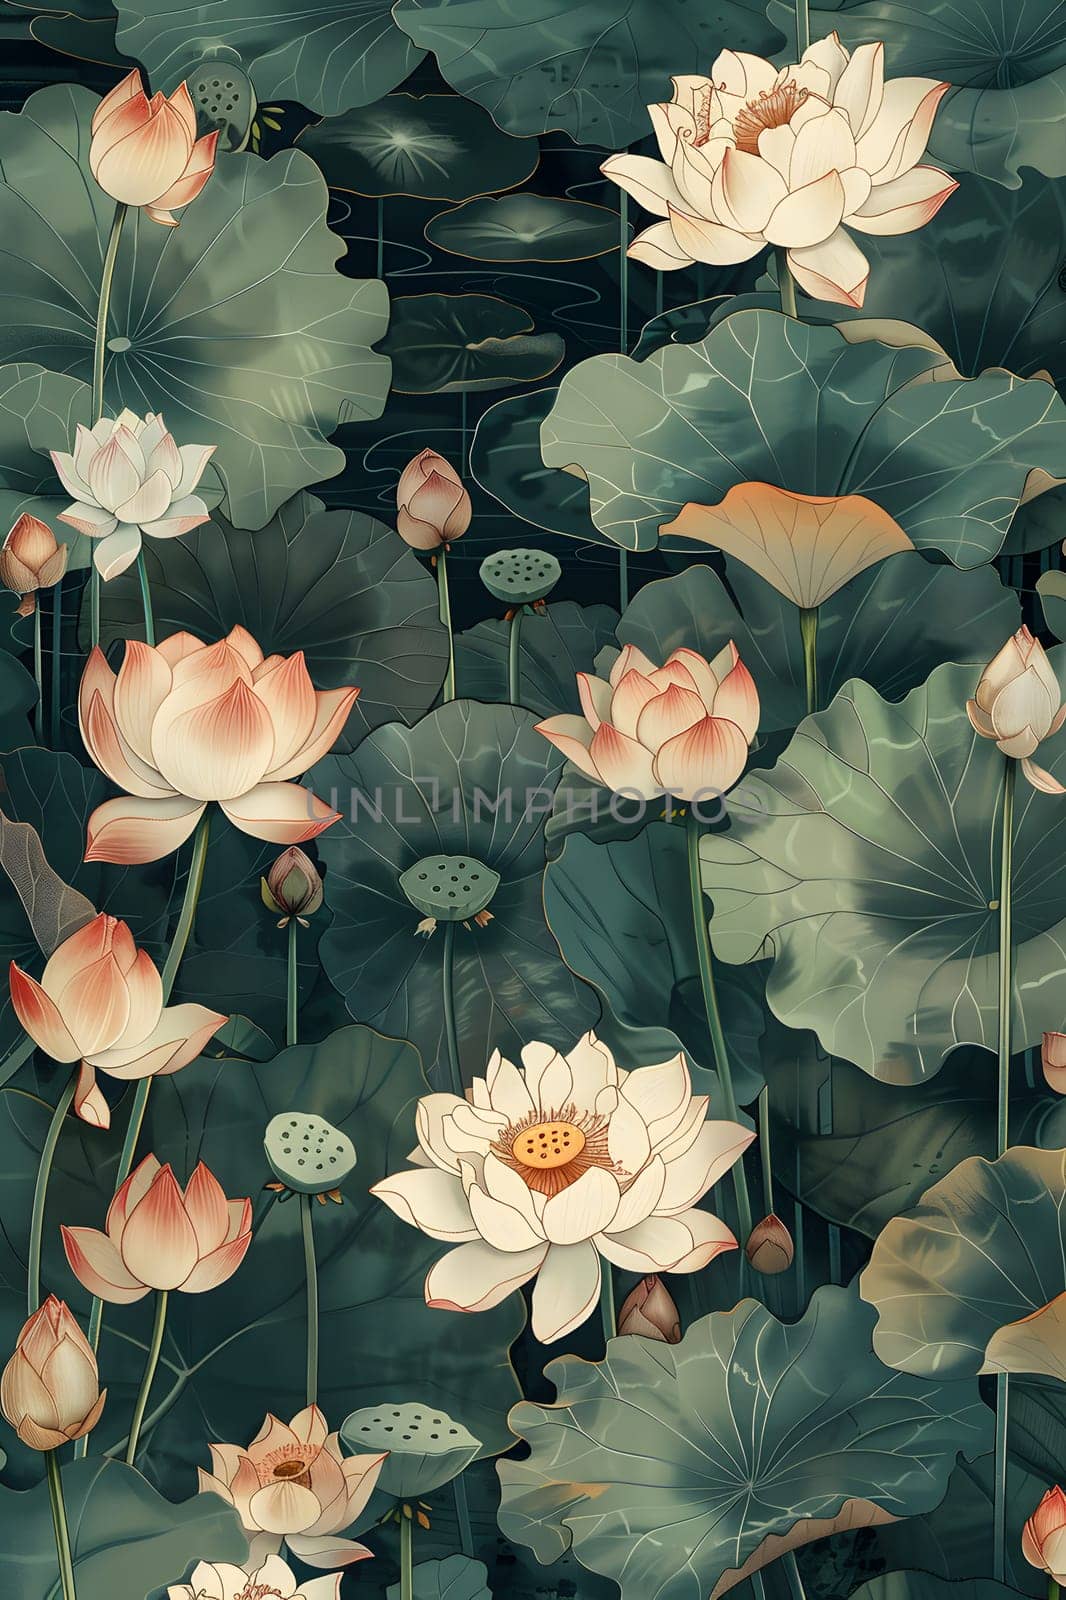 Art depicting pink lotus flowers and leaves in a pond by Nadtochiy